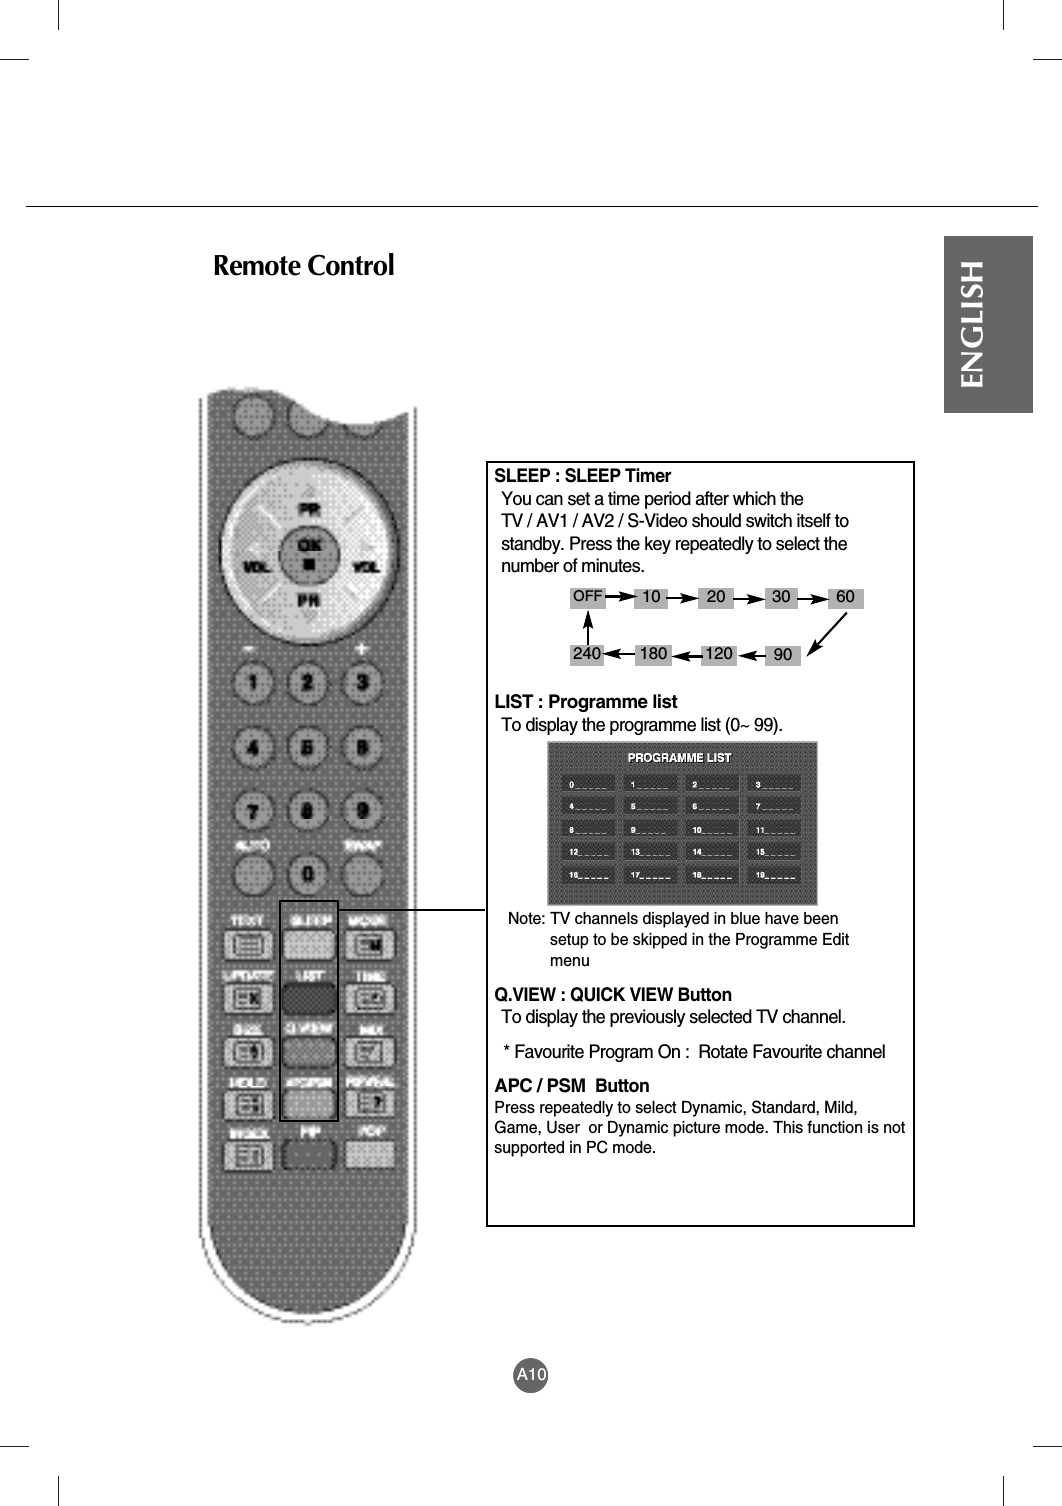 A10ENGLISHA10Remote ControlSLEEP : SLEEP TimerYou can set a time period after which the TV / AV1 / AV2 / S-Video should switch itself tostandby. Press the key repeatedly to select thenumber of minutes.LIST : Programme listTo display the programme list (0~ 99).Q.VIEW : QUICK VIEW ButtonTo display the previously selected TV channel.* Favourite Program On :  Rotate Favourite channel APC / PSM  ButtonPress repeatedly to select Dynamic, Standard, Mild,Game, User  or Dynamic picture mode. This function is notsupported in PC mode.Note: TV channels displayed in blue have beensetup to be skipped in the Programme Editmenu10 20 30 60240 180 120 90OFF